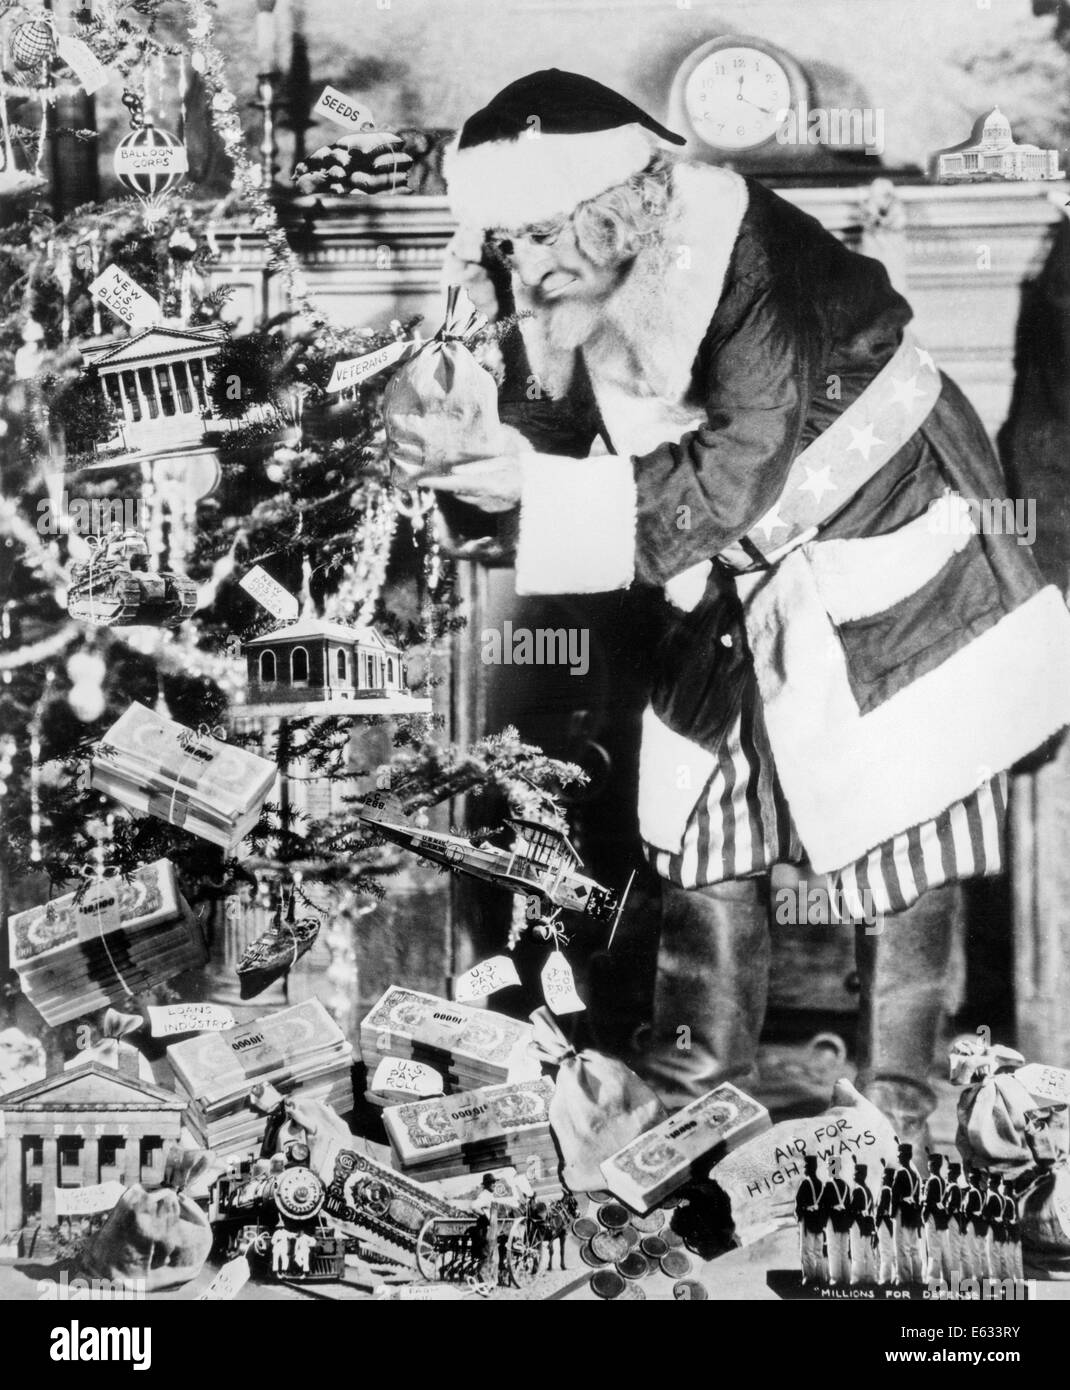 1930s UNCLE SAM DRESSED AS SANTA CLAUS DECORATING CHRISTMAS TREE WITH ICONS OF GOOD & SERVICES NEEDED DURING ECONOMIC DEPRESSION Stock Photo